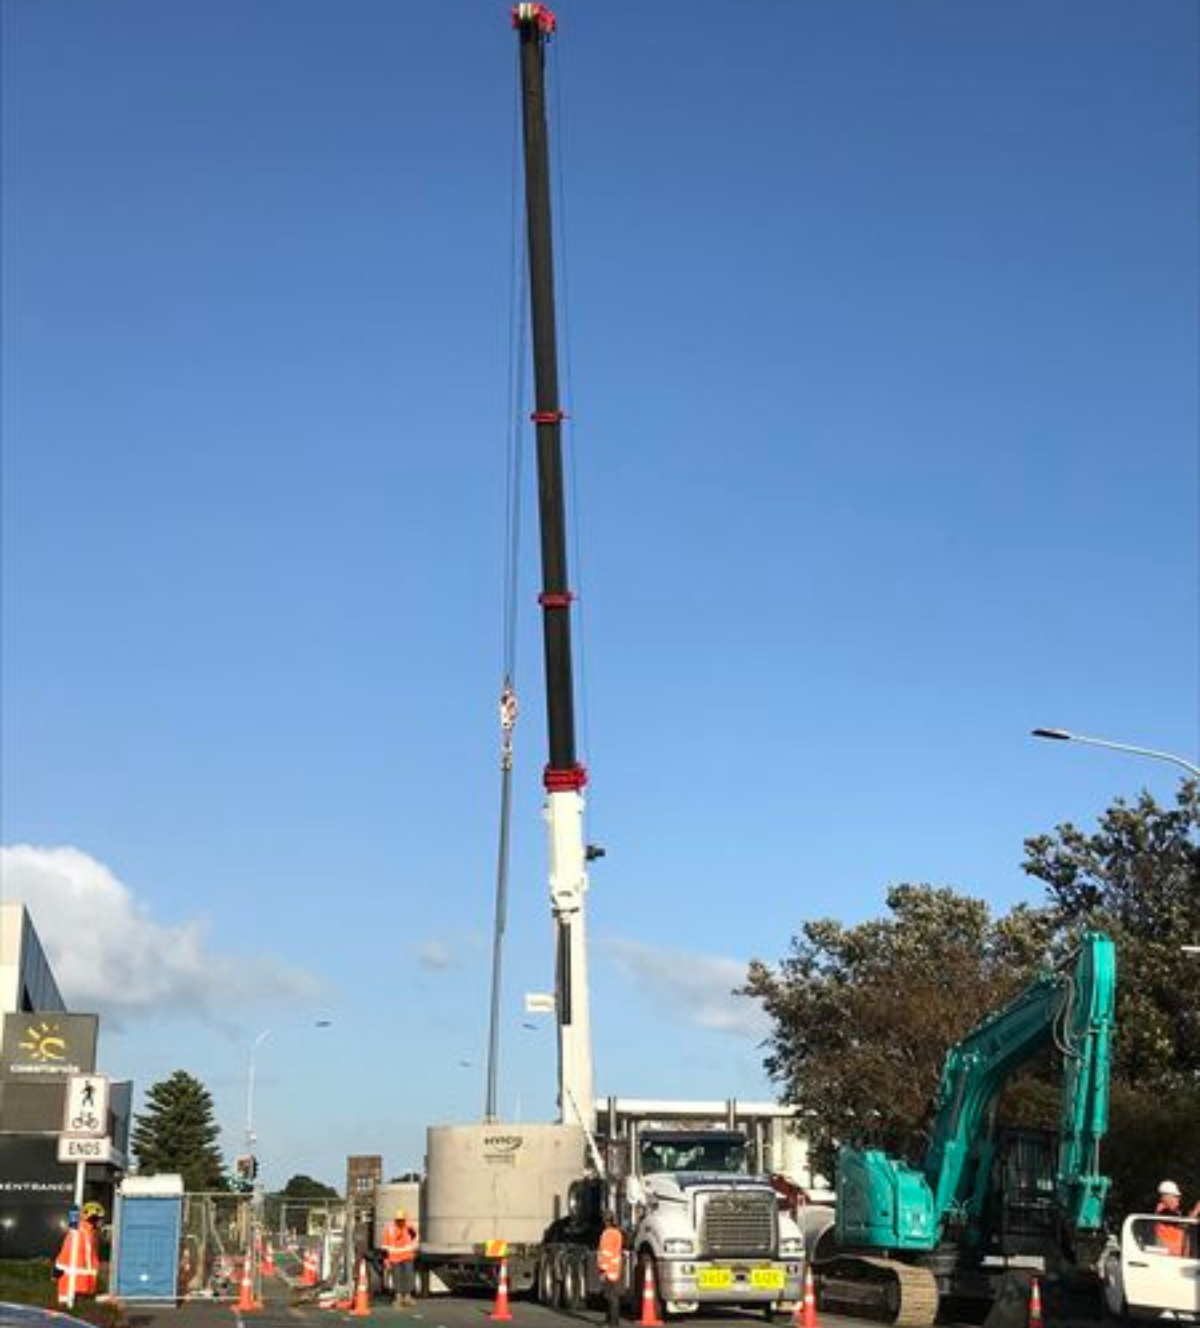 Craning large concrete stormwater pipes into place